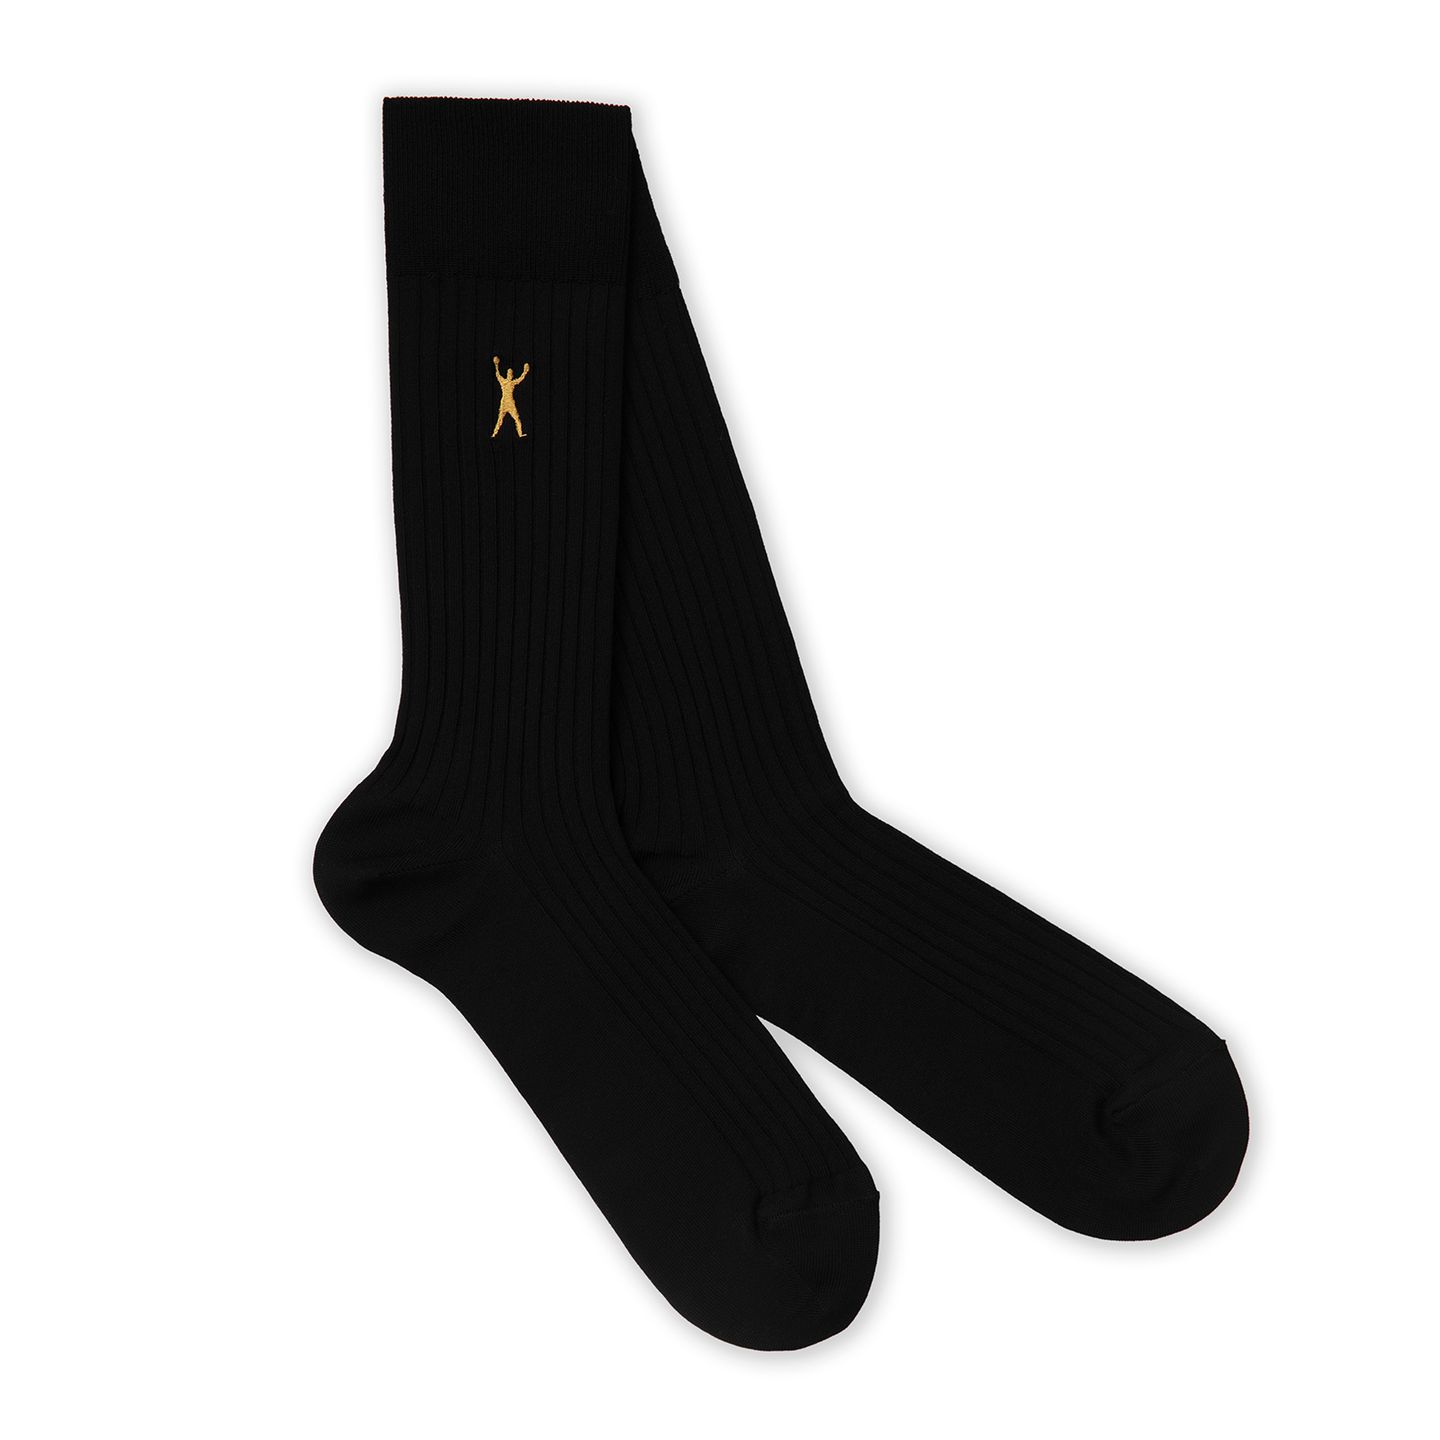 A pair of black Muhammad Ali socks with a white background